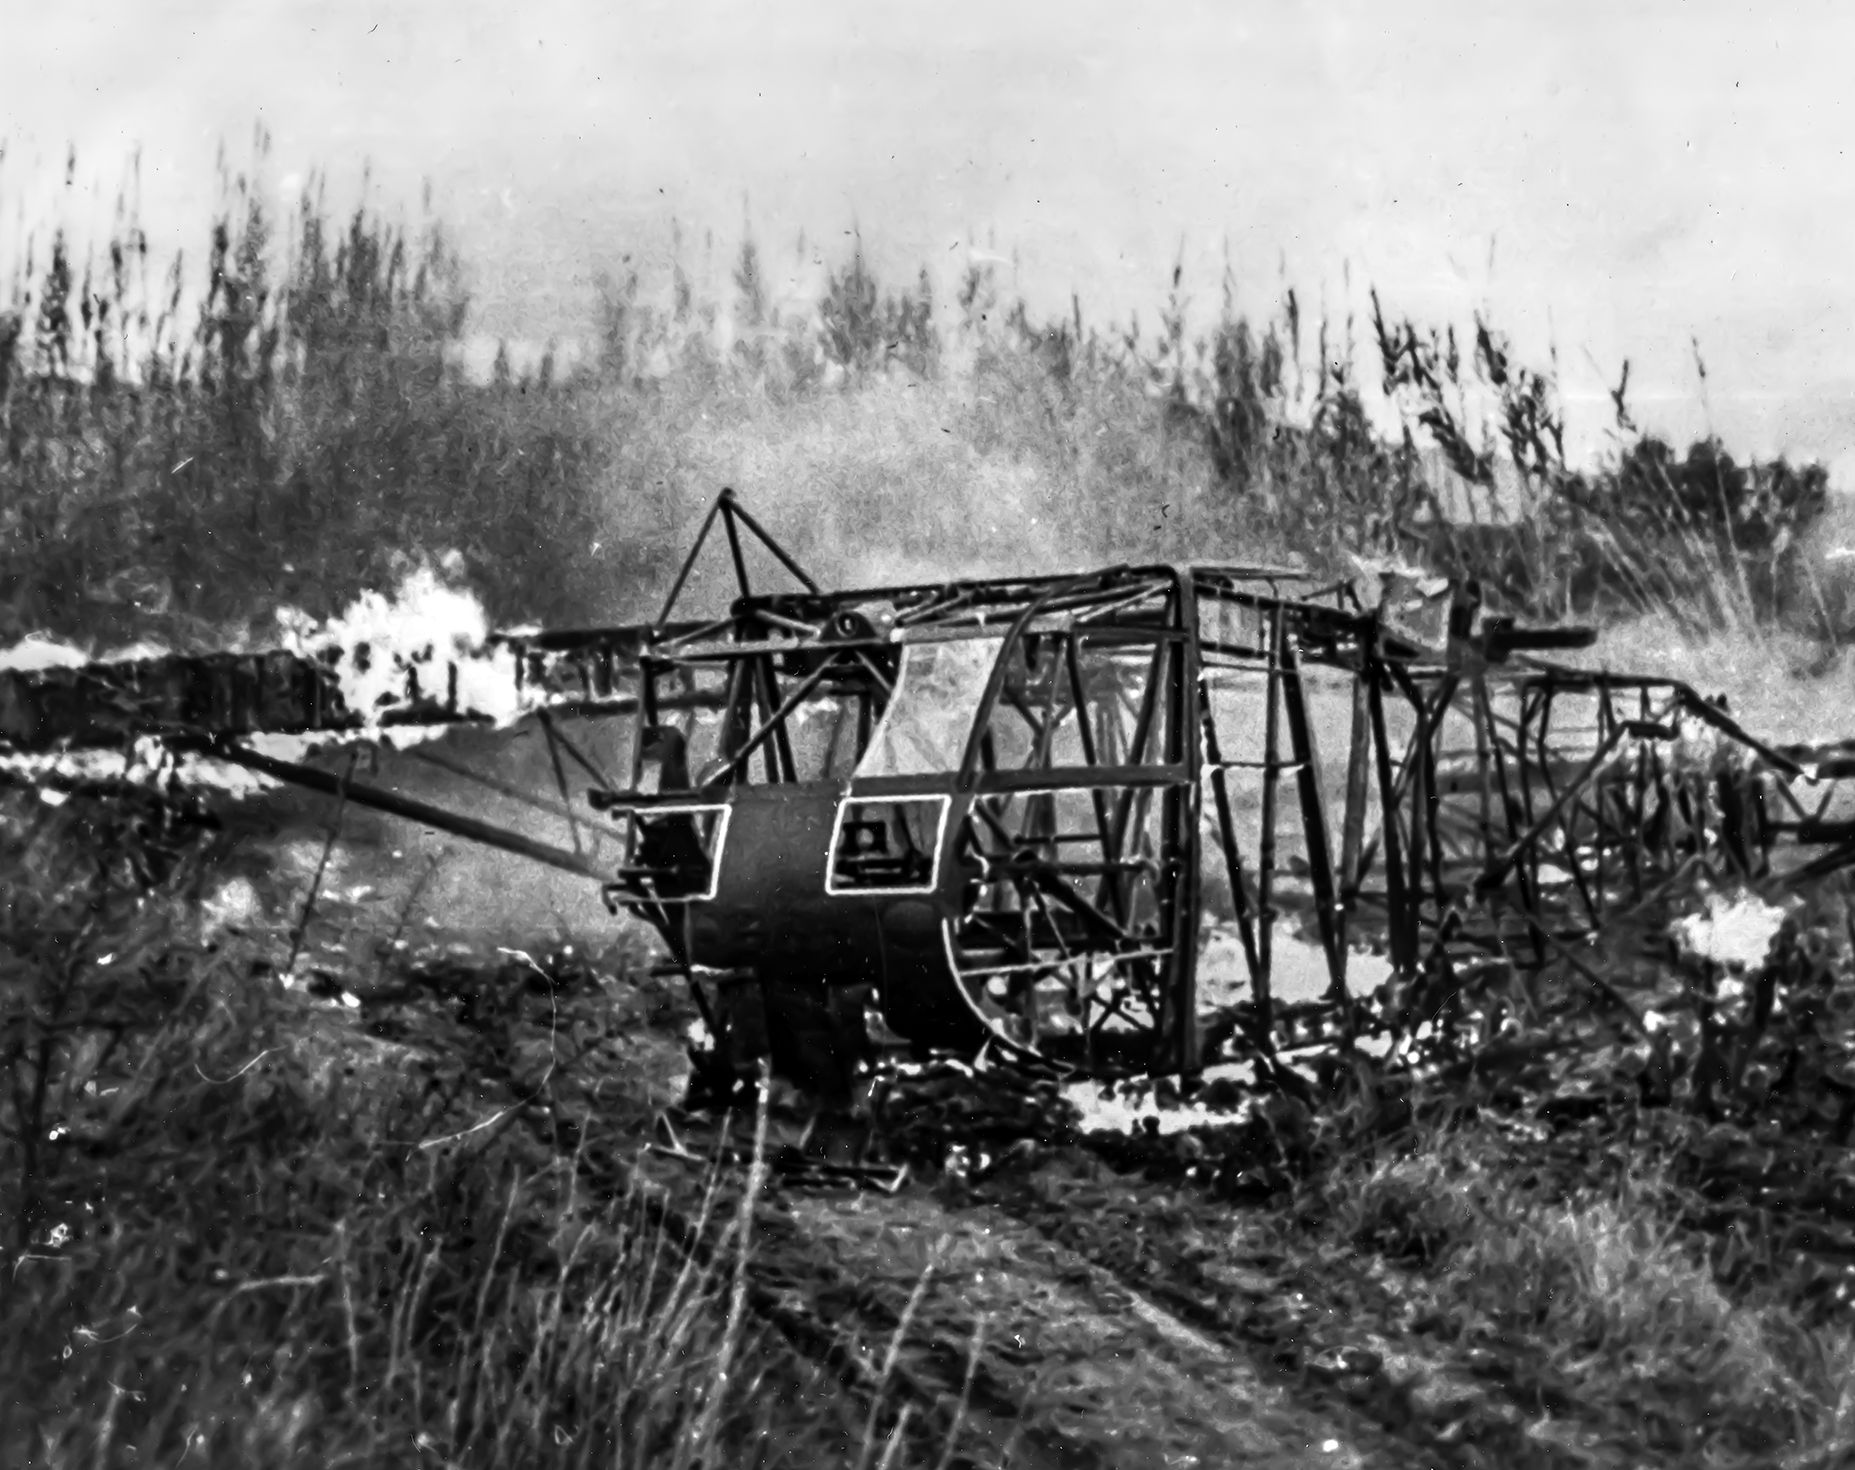 Operation Husky, the June 1943 invasion of Sicily, was a disaster for glider forces. Hundreds of paratroopers and glidermen lost their lives. Here, only the charred metal frame of a CG-4A remains in a Sicilian field. The fate of those aboard is unknown. 